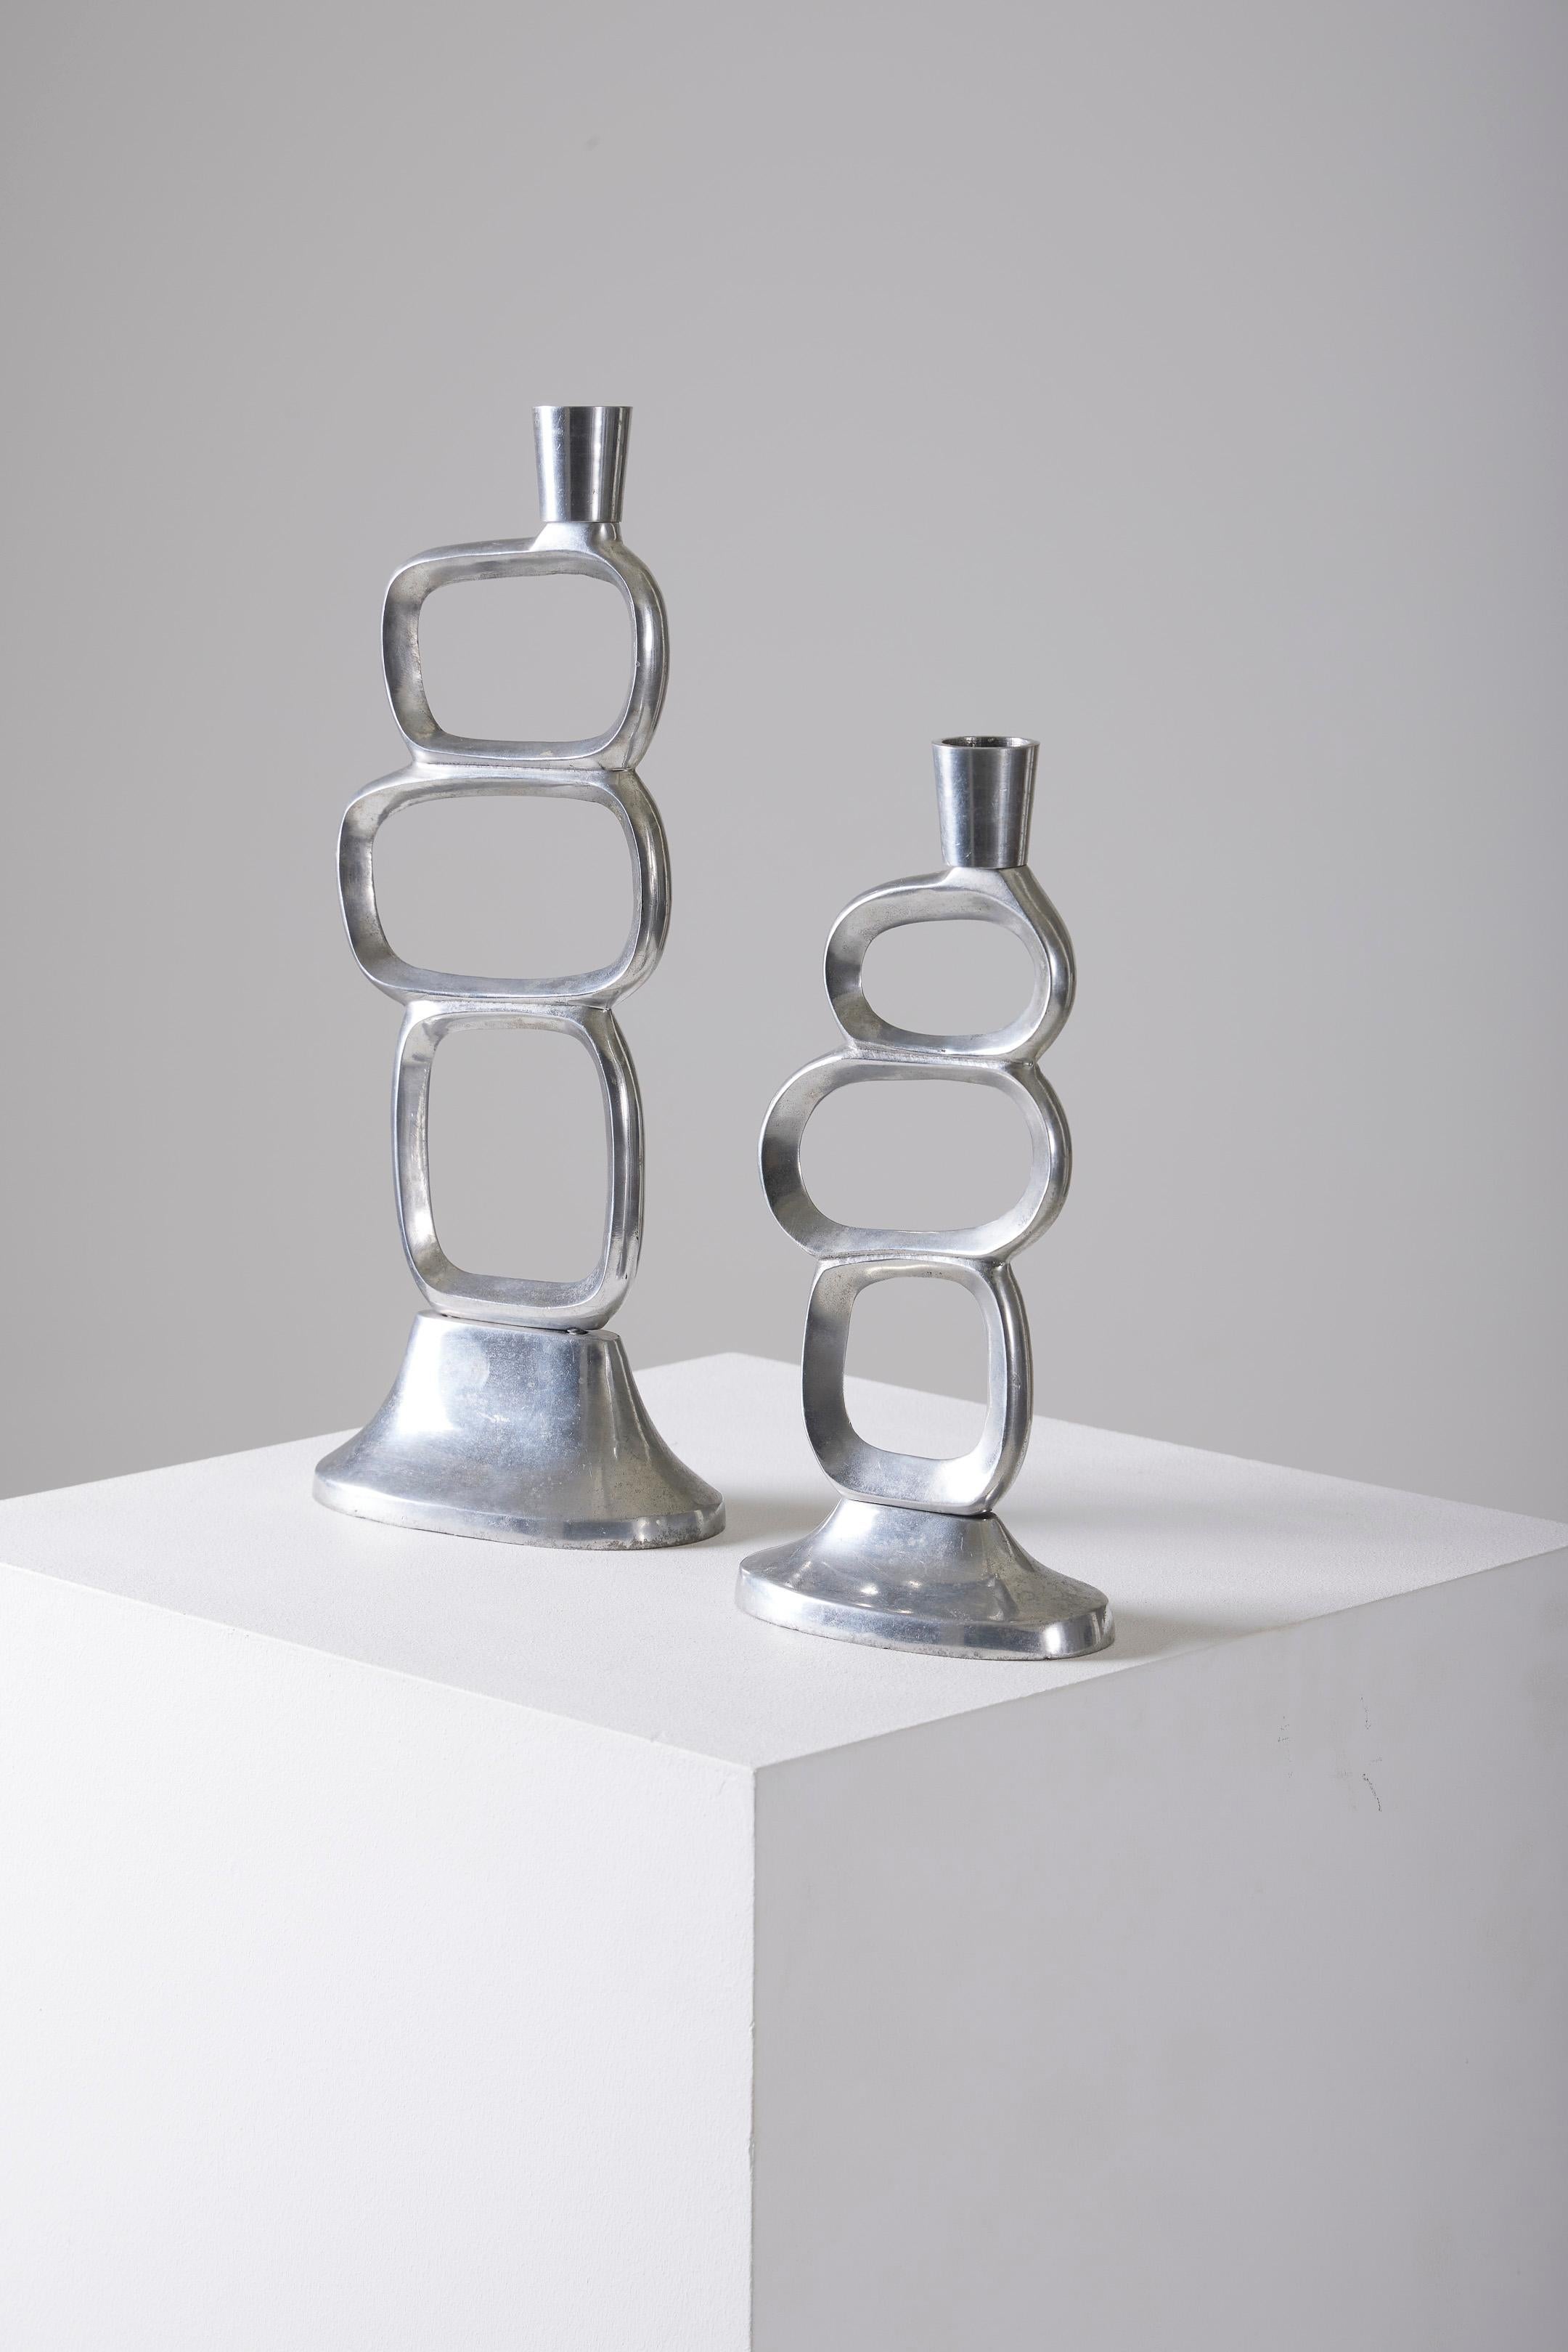 Vintage aluminum candlestick by English designer Matthew Hilton from the 1980s, England. Very good condition.
LP3040